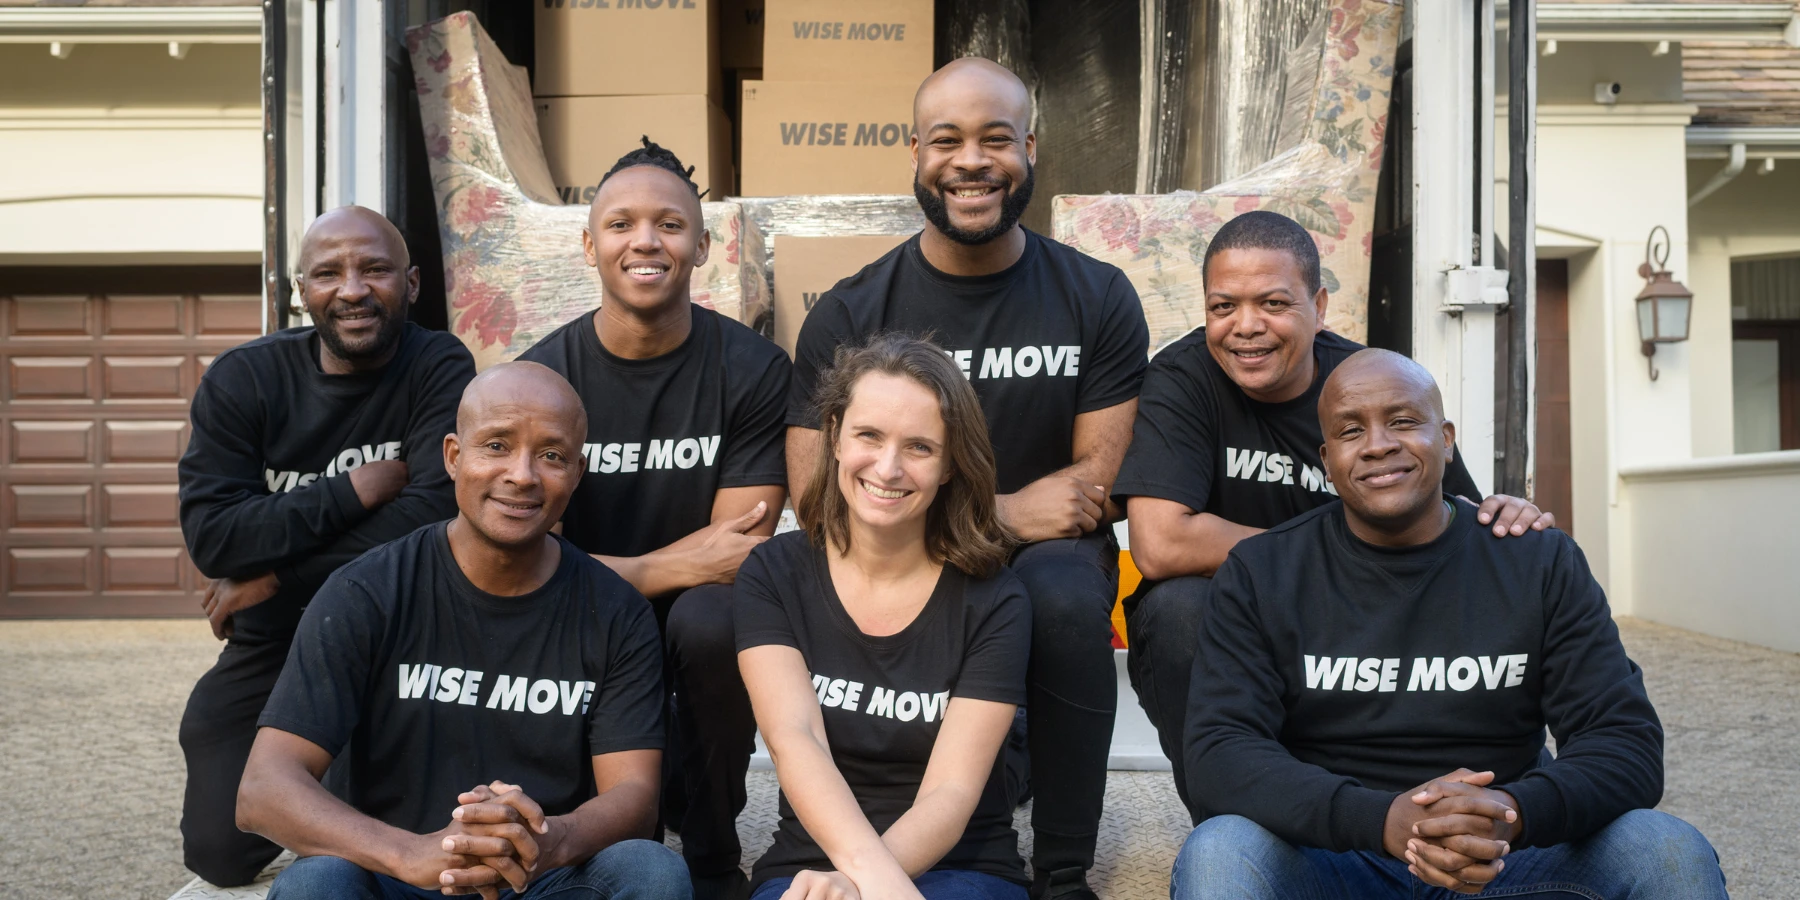 Find moving company insurance with Wise Move